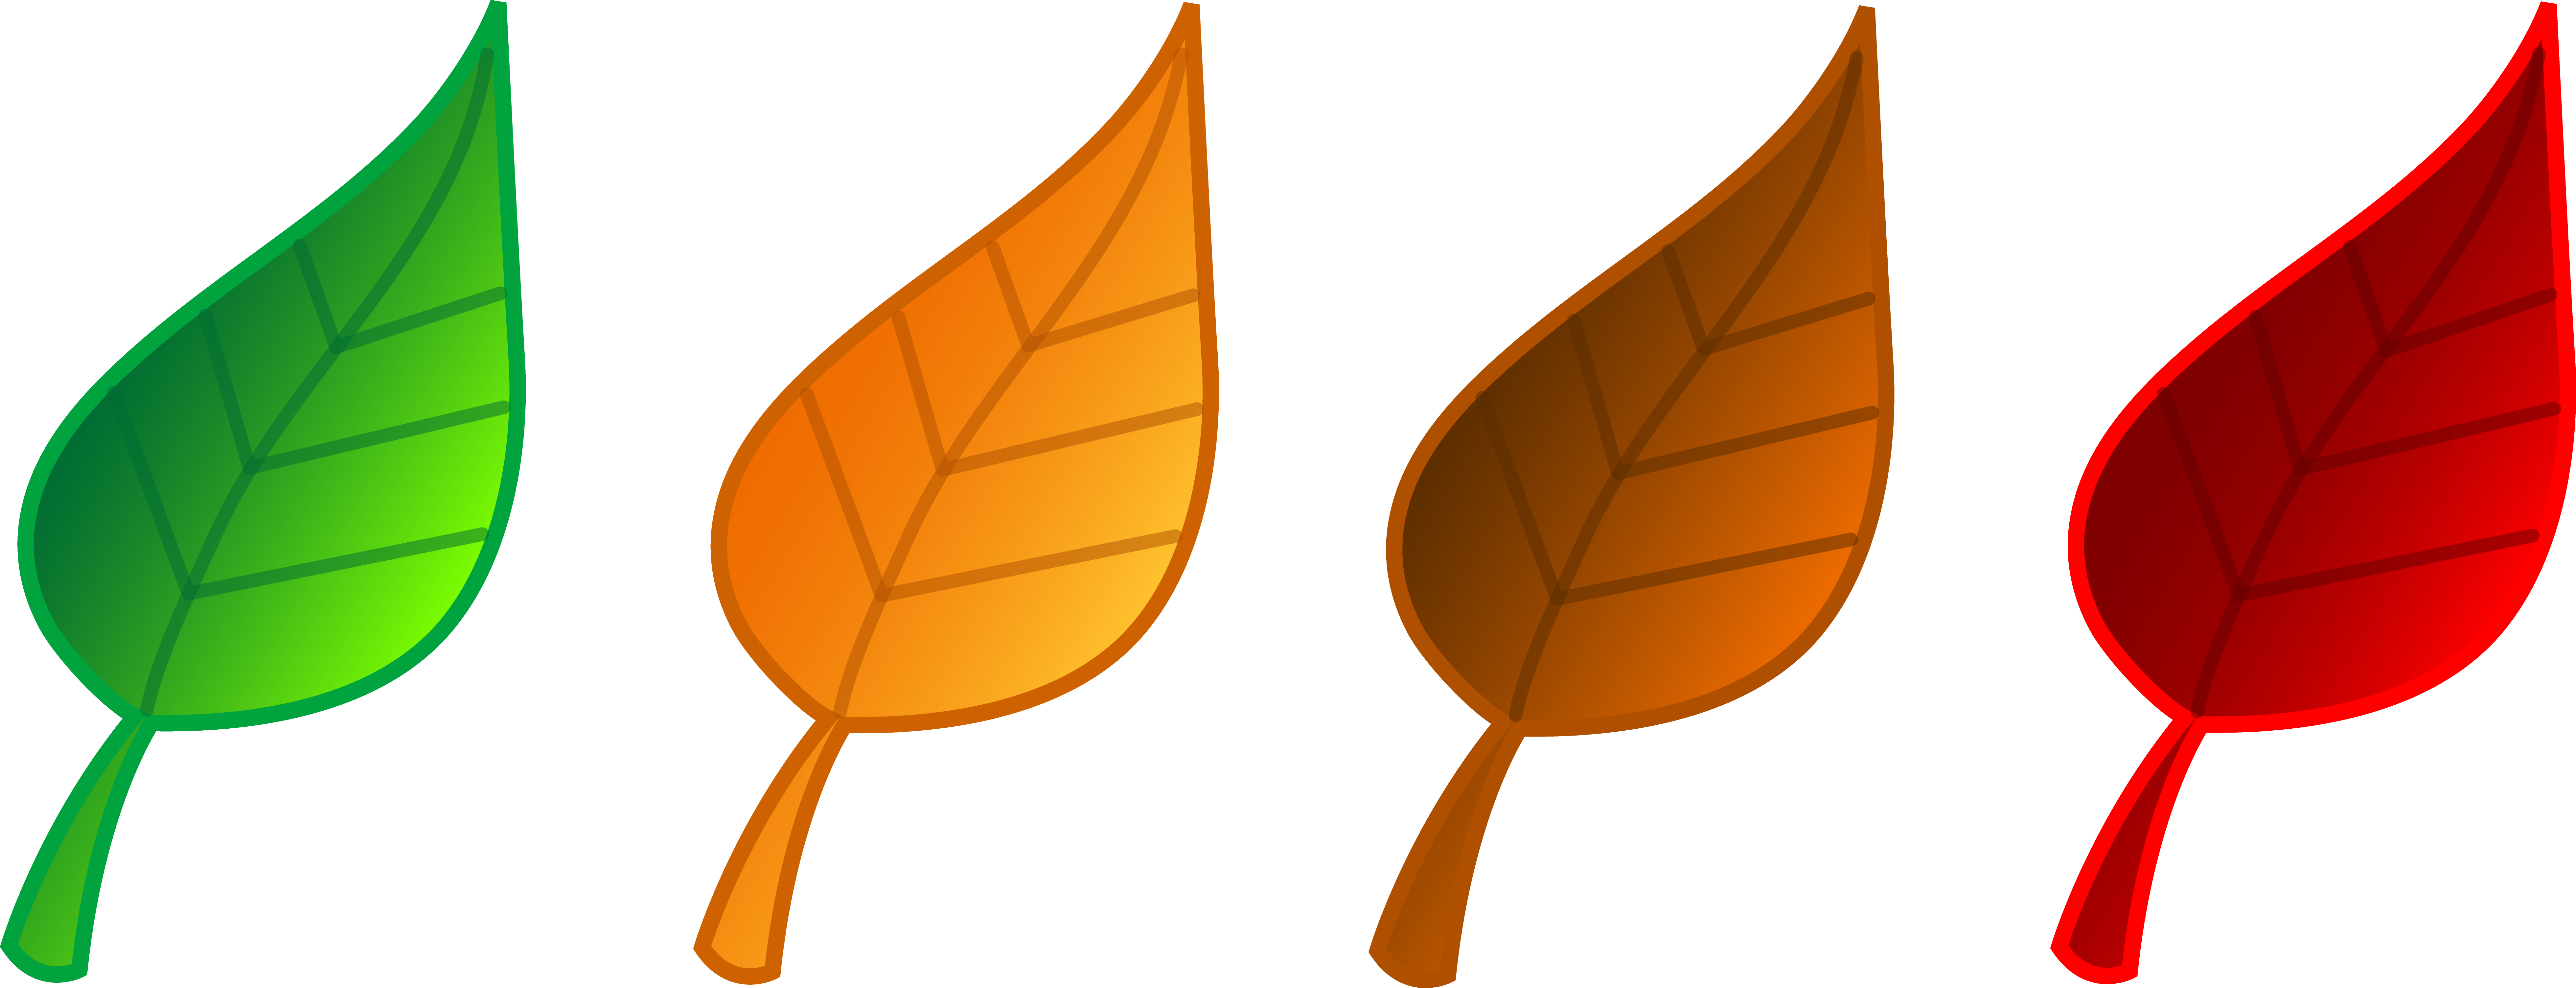 free-autumn-leaves-clip-art-download-free-autumn-leaves-clip-art-png